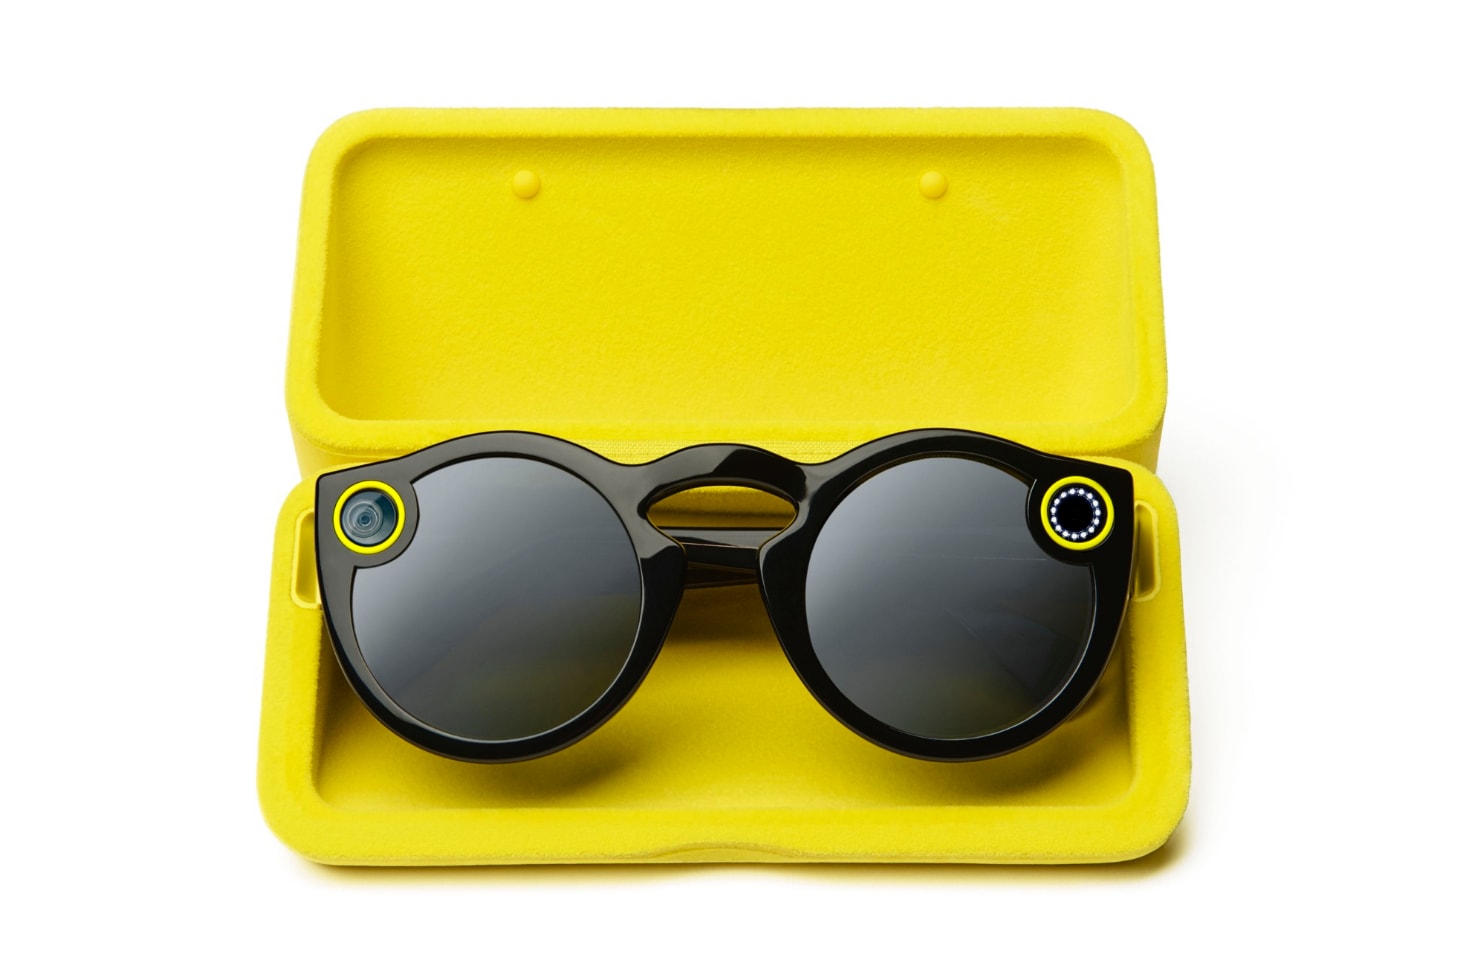 Rochester Optical Snapchat Spectacles